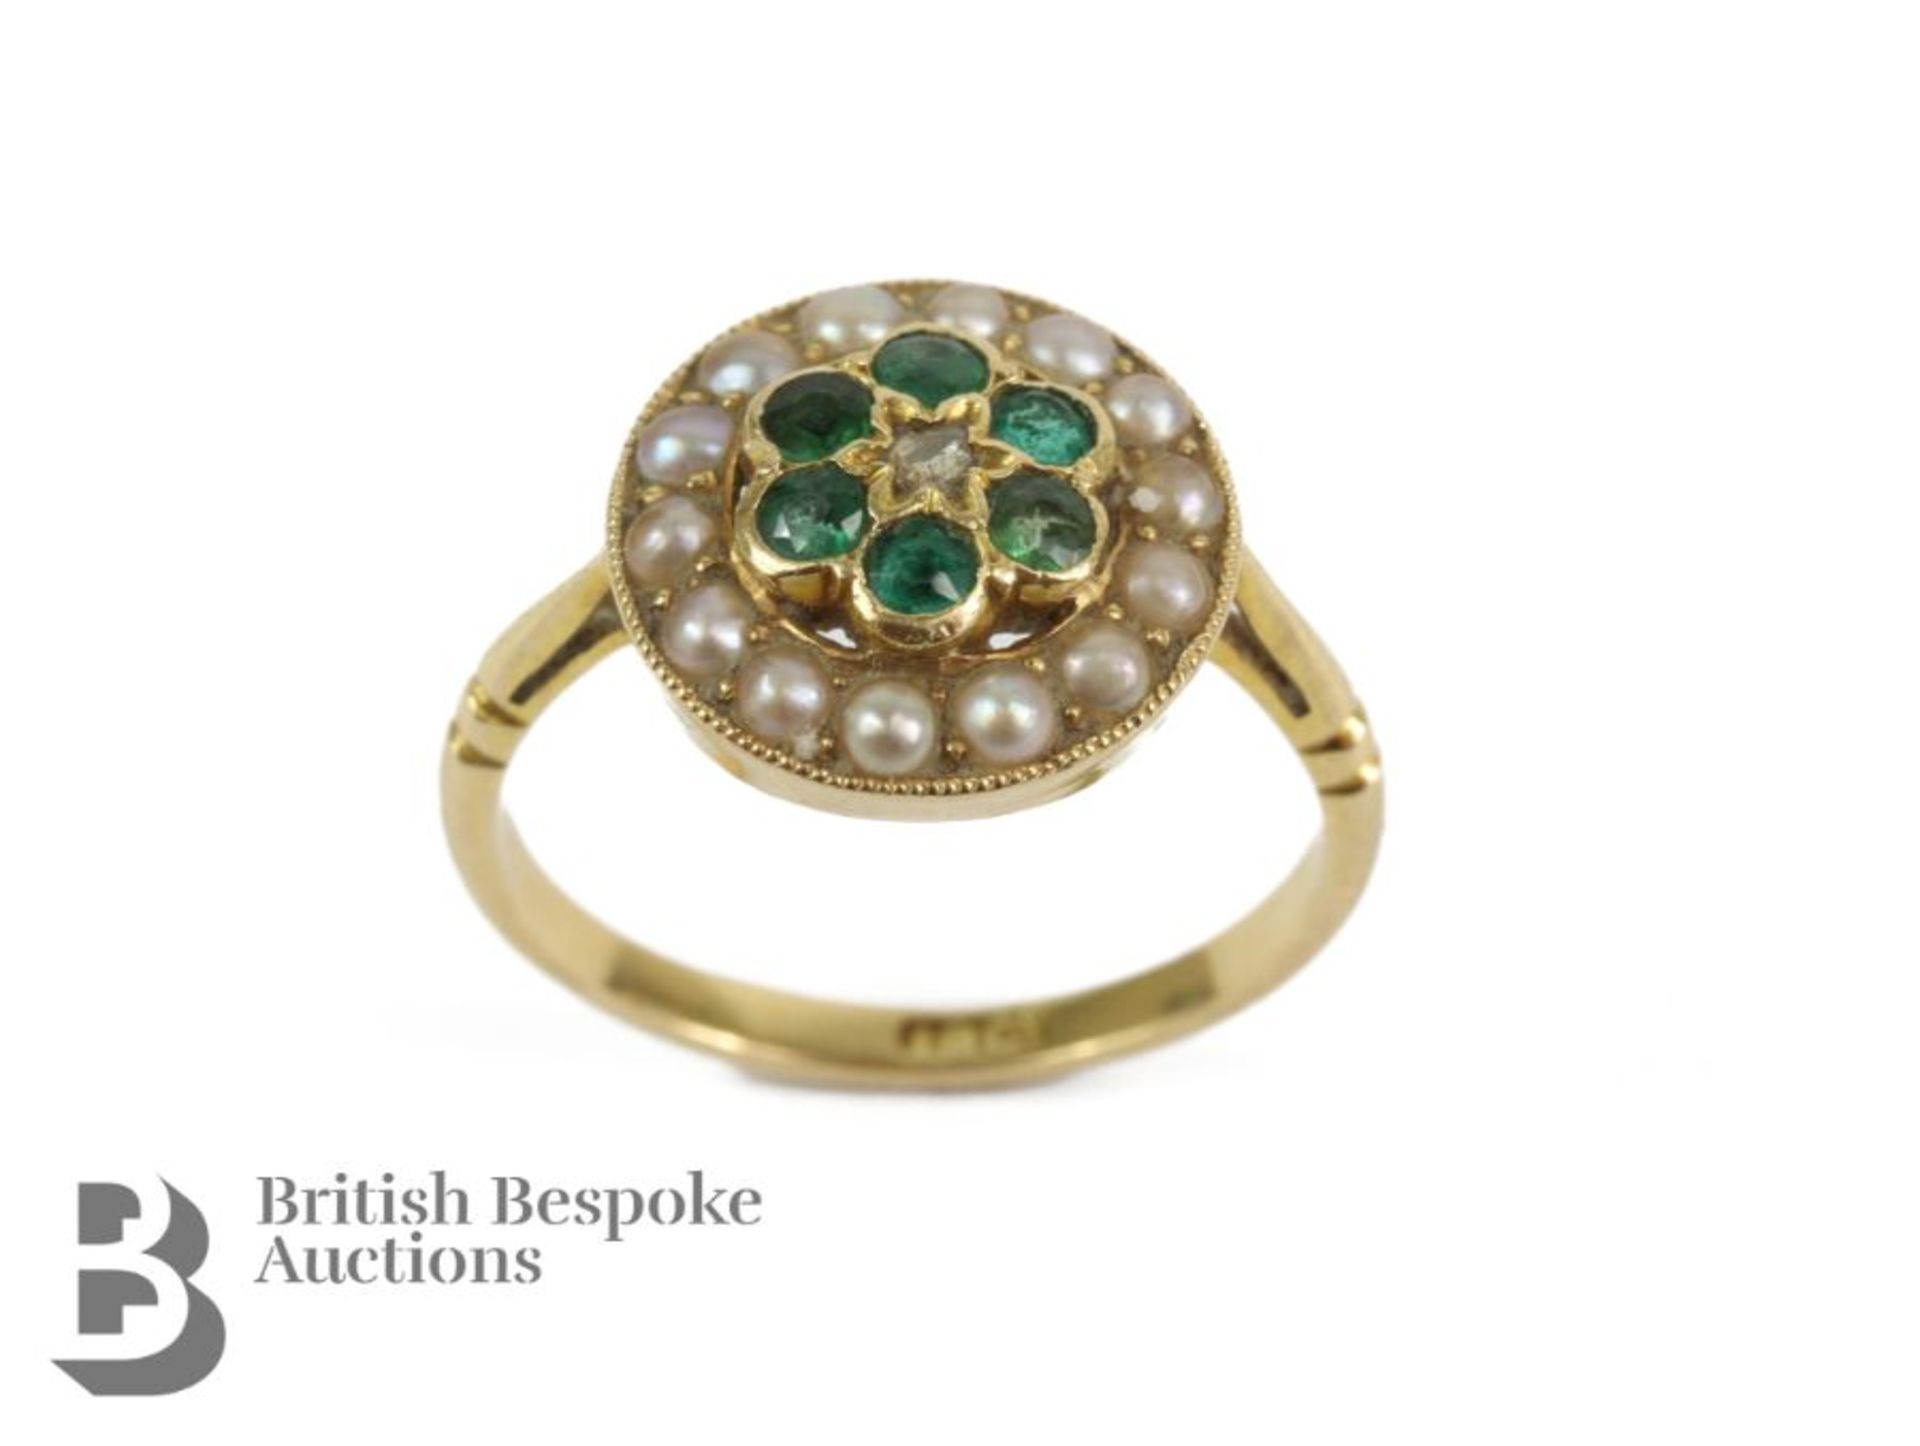 19th Century 18ct Gold Diamond, Emerald and Pearl Ring